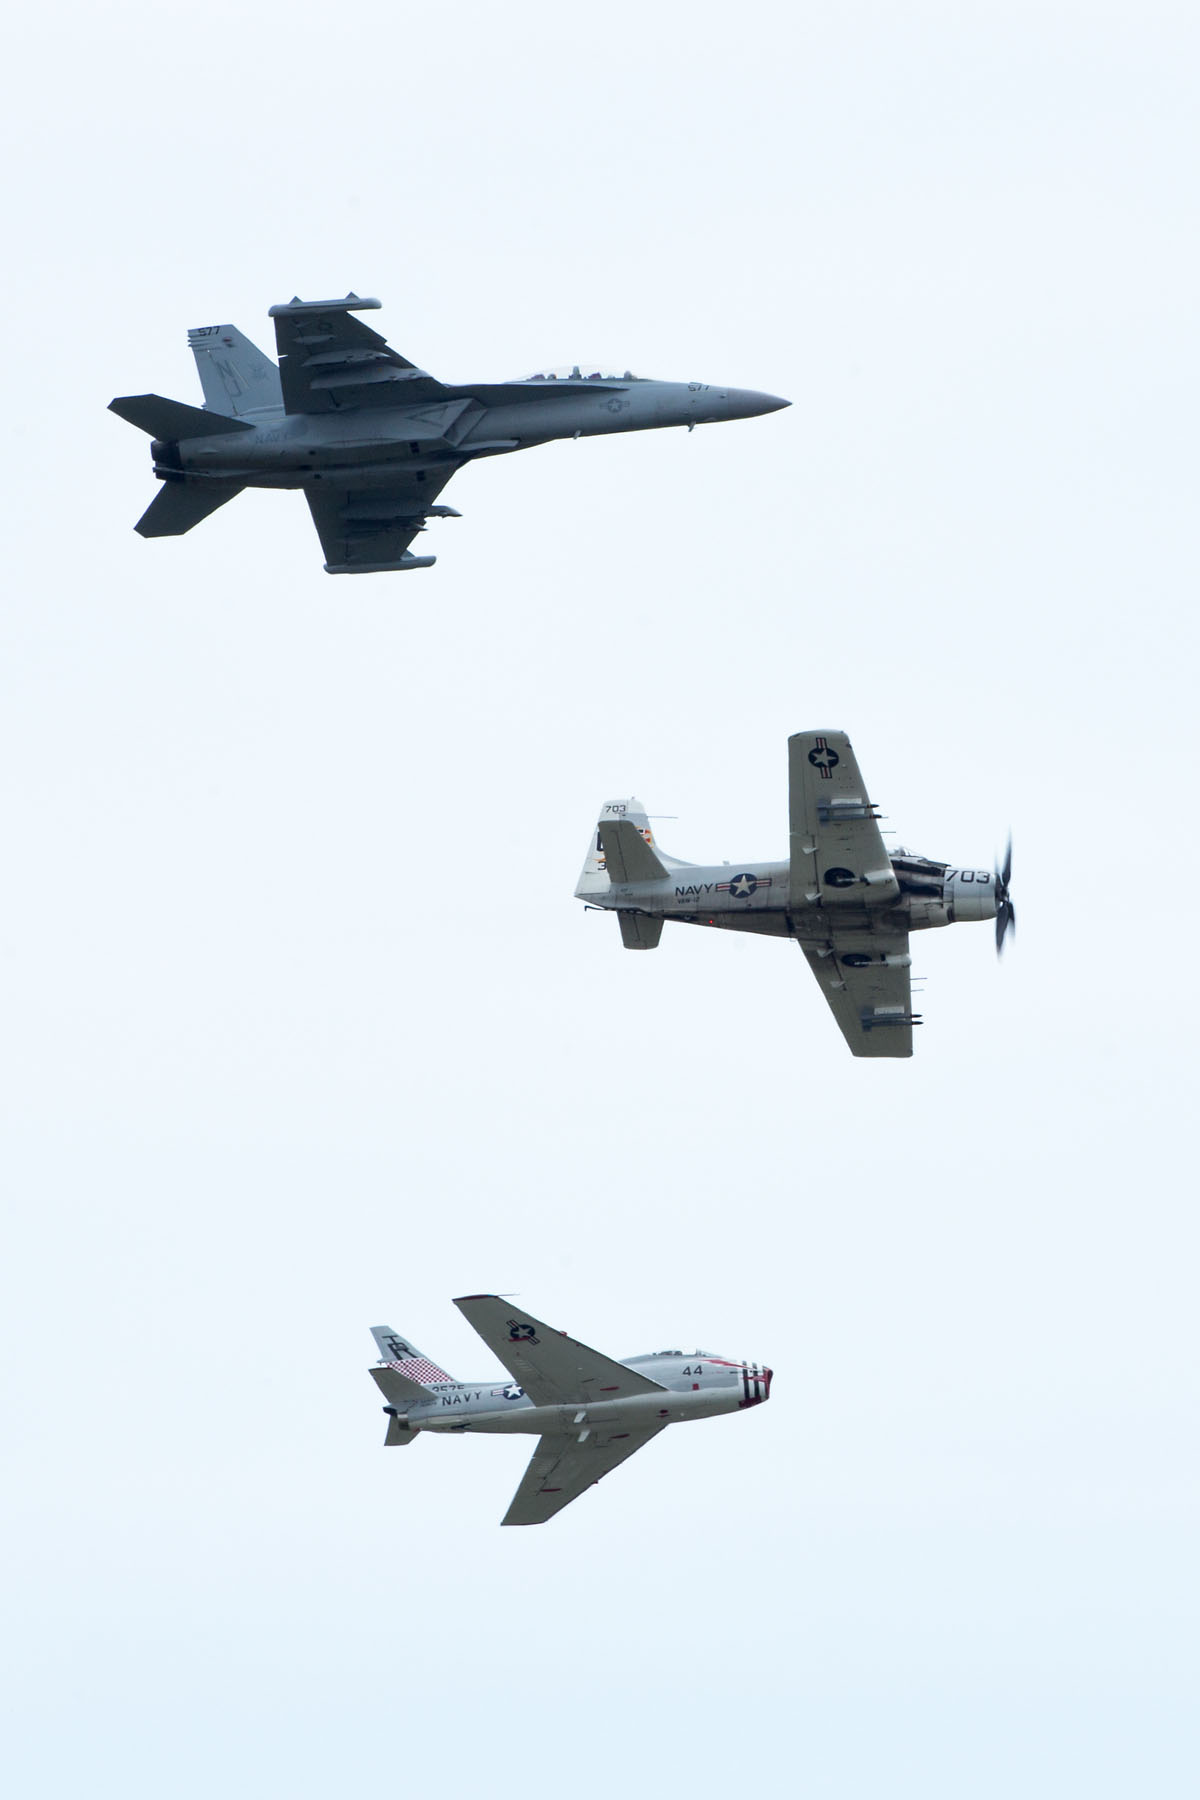 Heritage flight, Sioux Falls Air Show, August 2019.  The flight featured Navy planes (from top) F/A-18 Hornet, AD-4 Skyraider, and FJ-4B Fury.  Click for next photo.